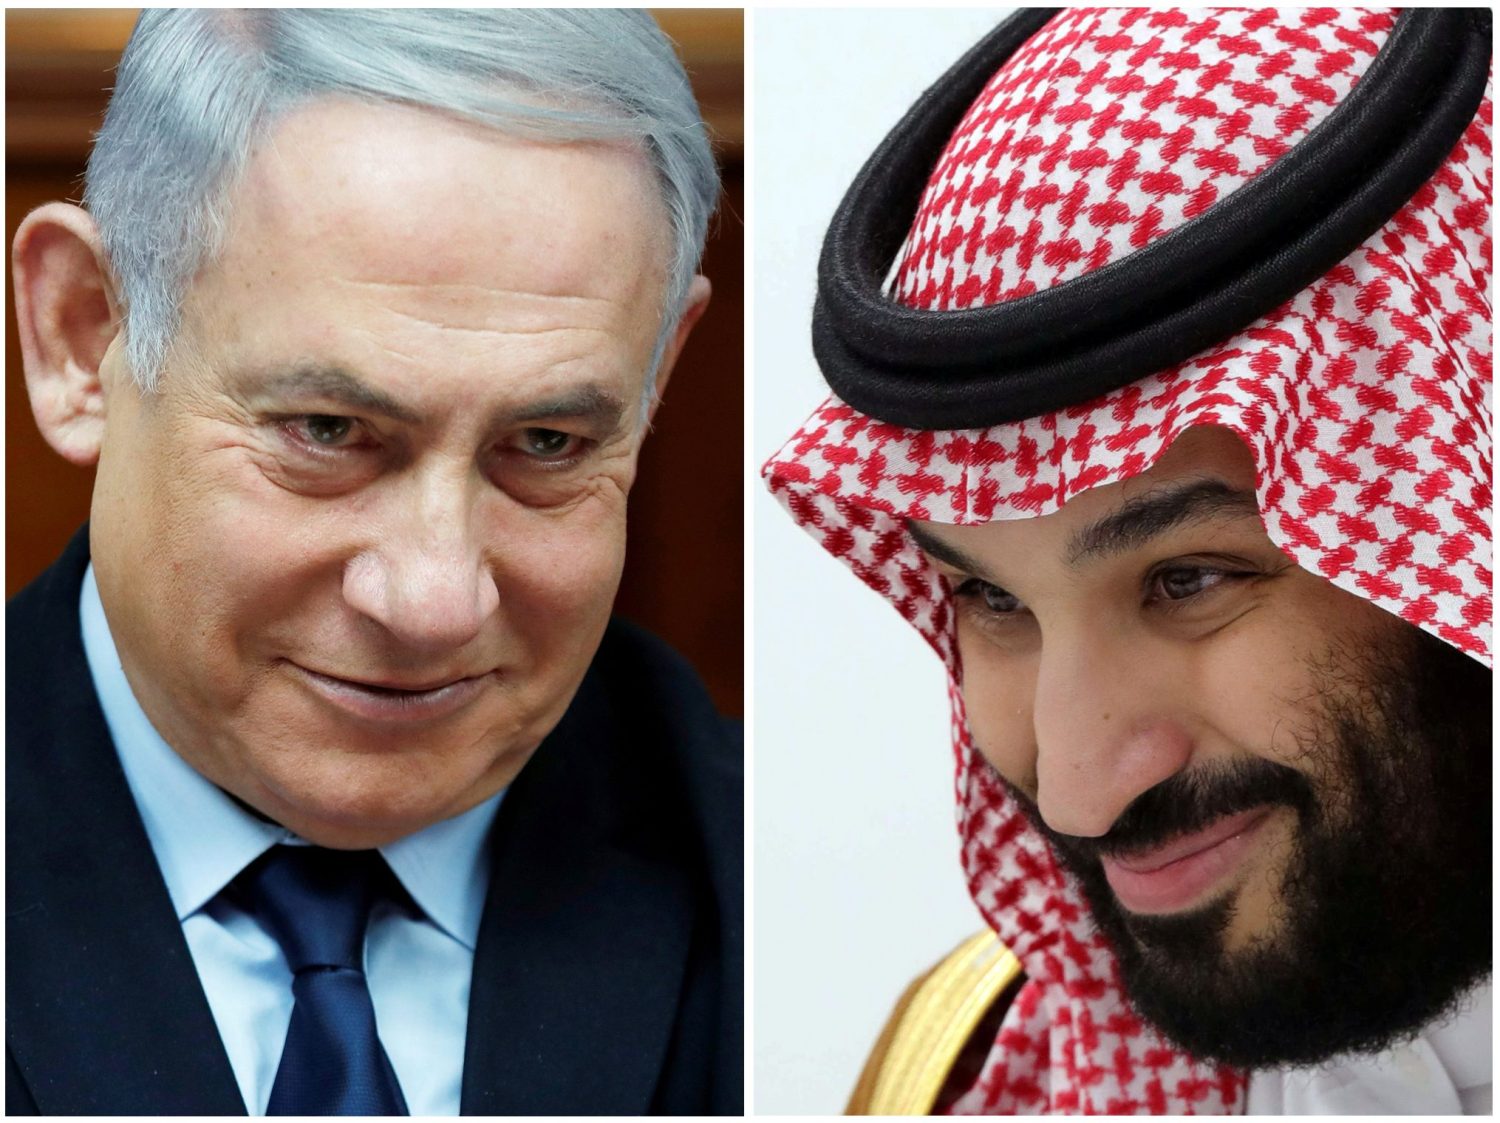 A combination picture shows Saudi Arabia's Crown Prince Mohammed Bin Salman in Osaka, Japan June 29, 2019 and Israeli Prime Minister Benjamin Netanyahu in Jerusalem February 9, 2020. Sputnik/Mikhail Klimentyev/Kremlin via REUTERS ATTENTION EDITORS - THIS IMAGE WAS PROVIDED BY A THIRD PARTY and REUTERS/Ronen Zvulun/Pool's Crown Prince Mohammed Bin Salman in Osaka, Japan June 29, 2019 and Israeli Prime Minister Benjamin Netanyahu in Jerusalem February 9, 2020. Sputnik/Mikhail Klimentyev/Kremlin via REUTERS ATTENTION EDITORS - THIS IMAGE WAS PROVIDED BY A THIRD PARTY and REUTERS/Ronen Zvulun/Pool